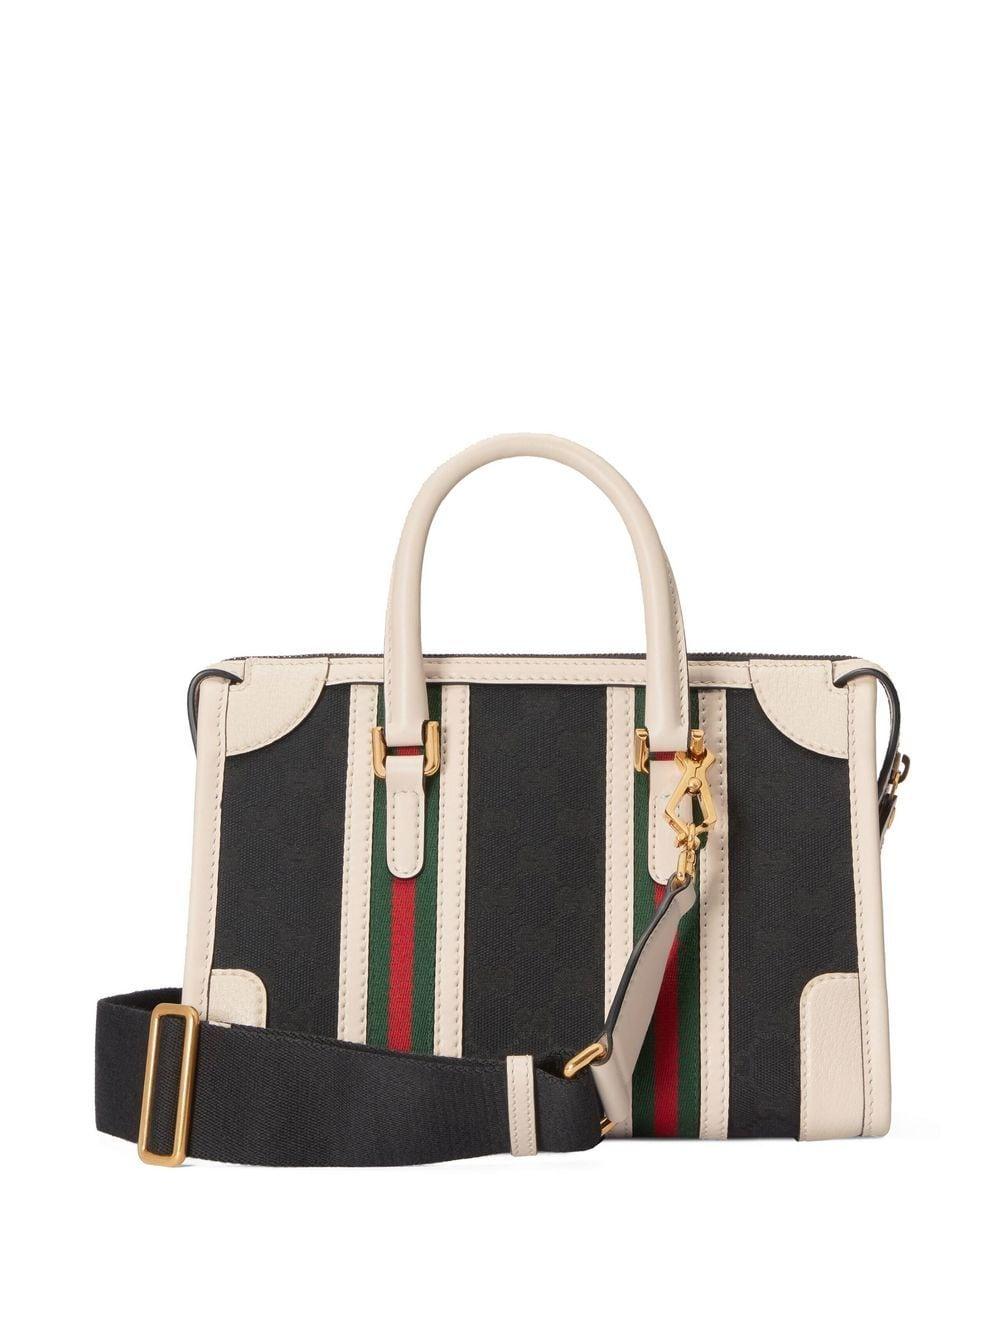 Gucci Ophidia Small Top Hadle Bag White